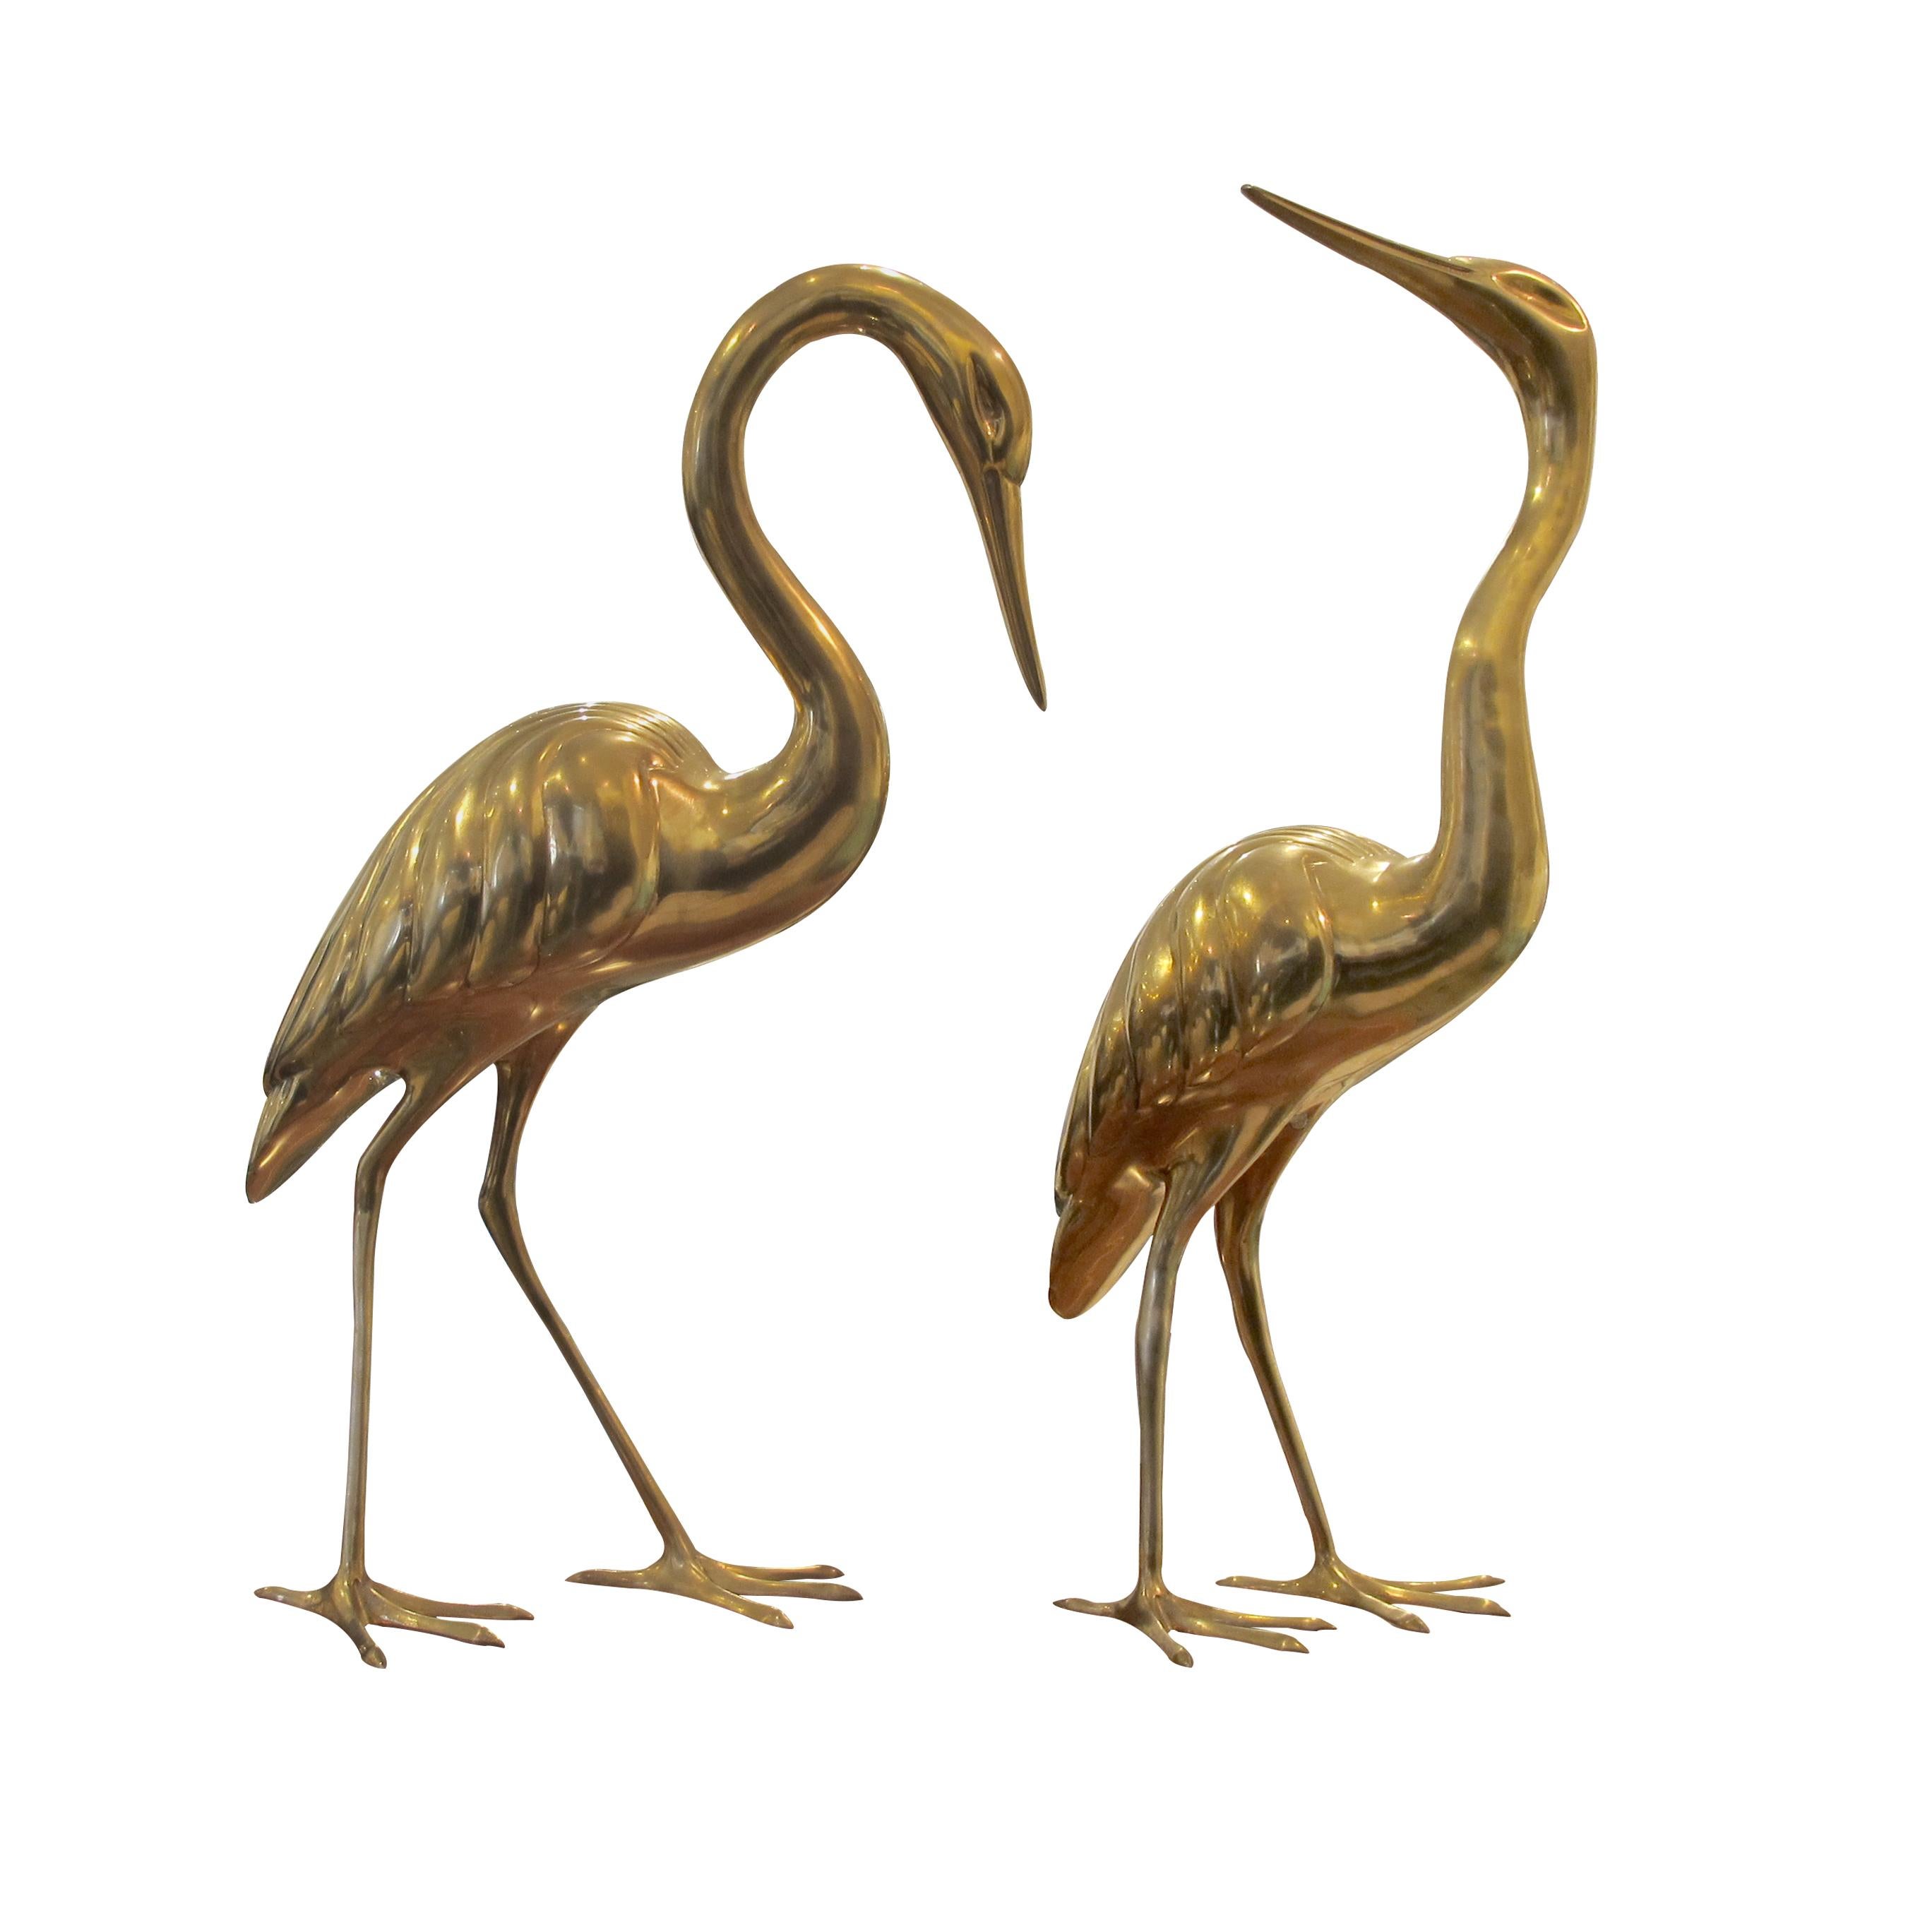 Pair of 1960s large brass herons which are very realistic with elegant smooth curves and postures. The herons are free standing and well-balanced. In excellent vintage condition with a matte shine but can be polished to an even higher shine. The